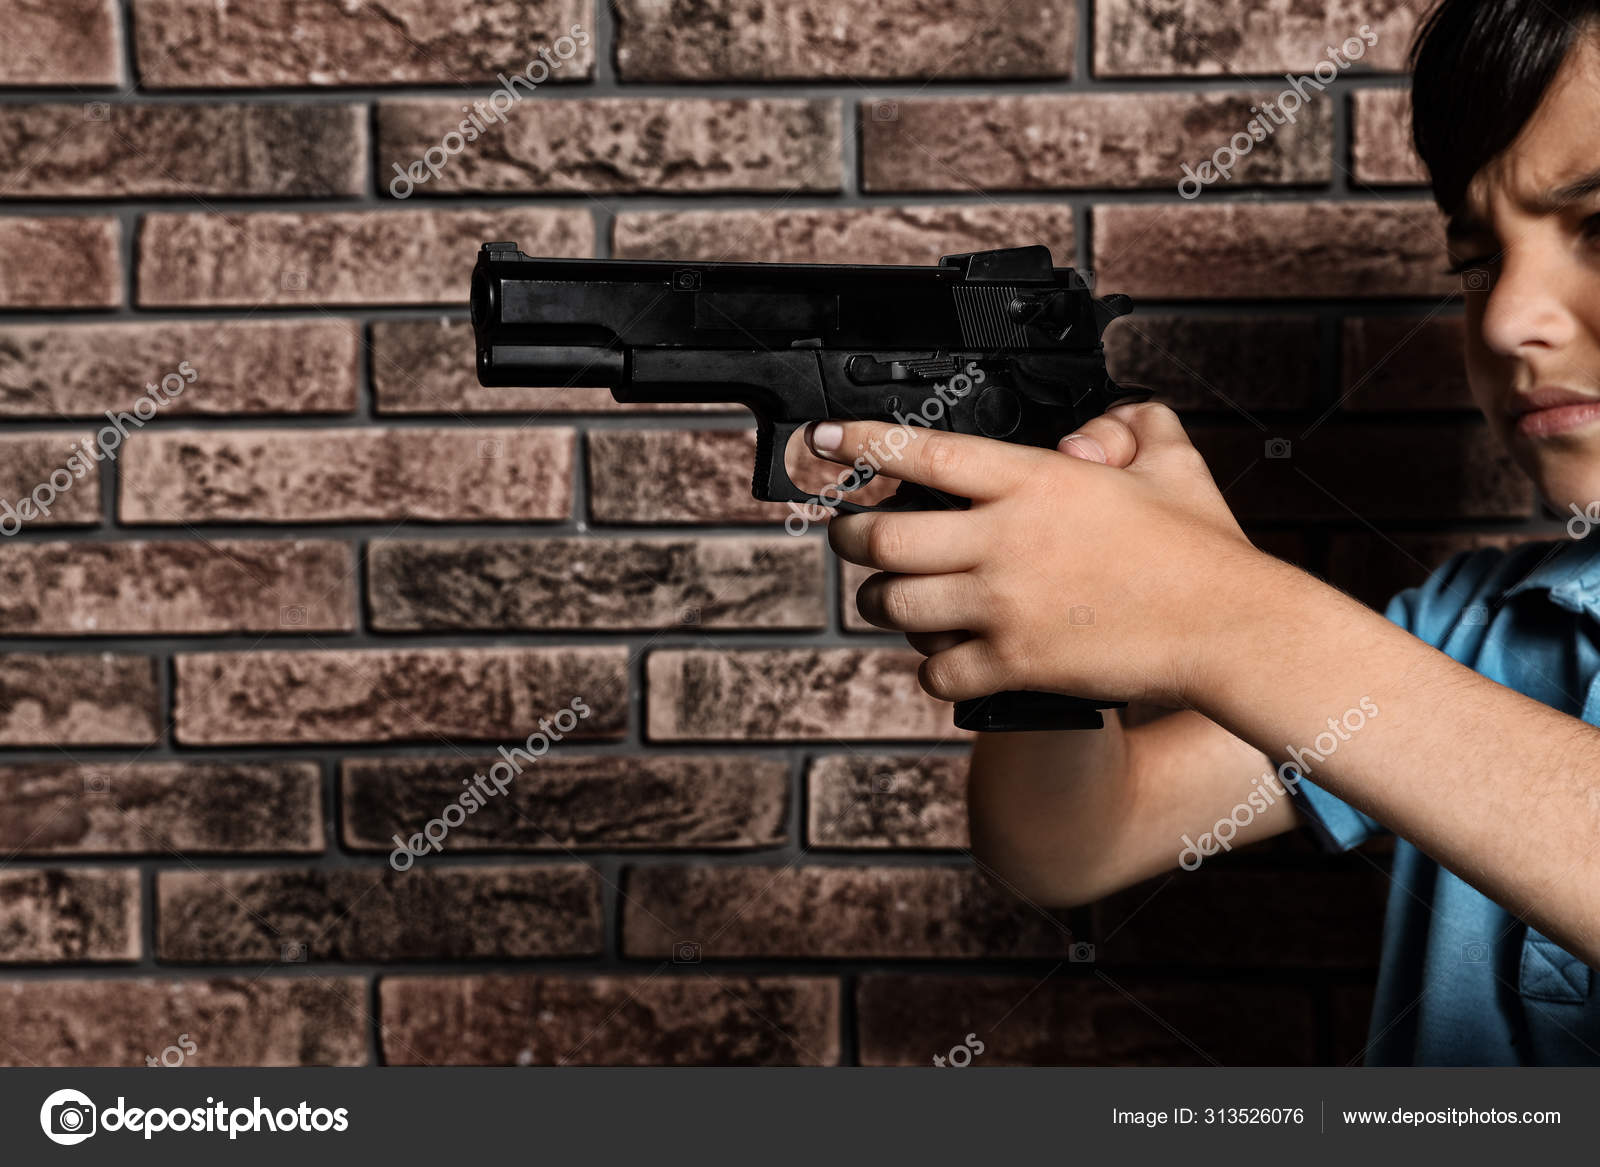 Little child playing with gun against brick wall